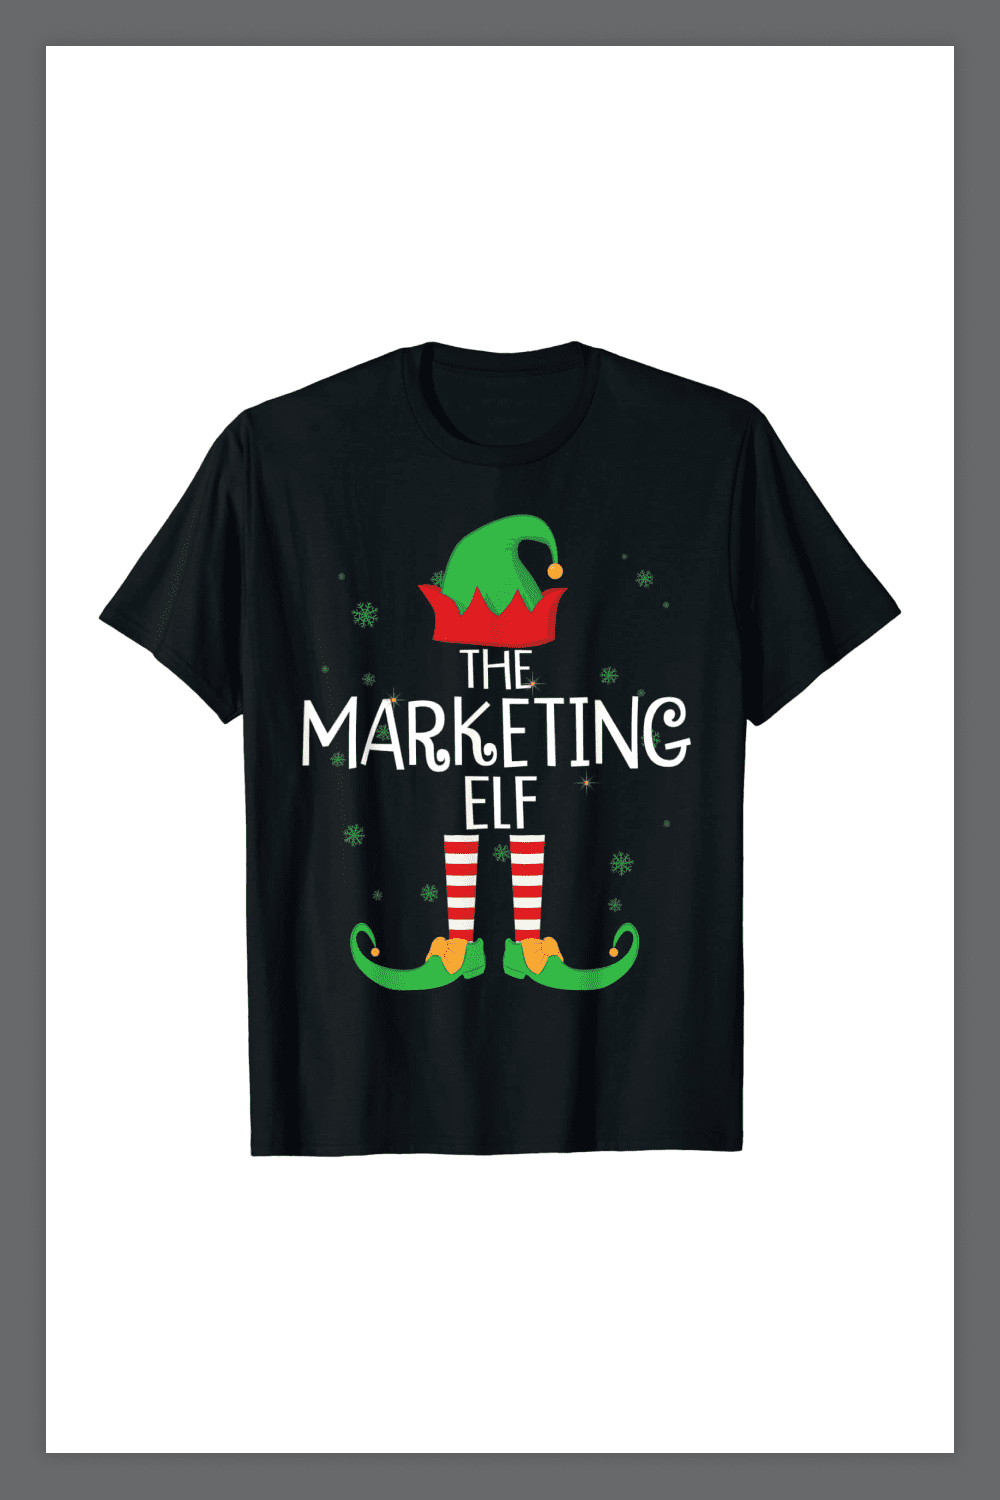 Black t-shirt with pic and inscription The Marketing Elf.